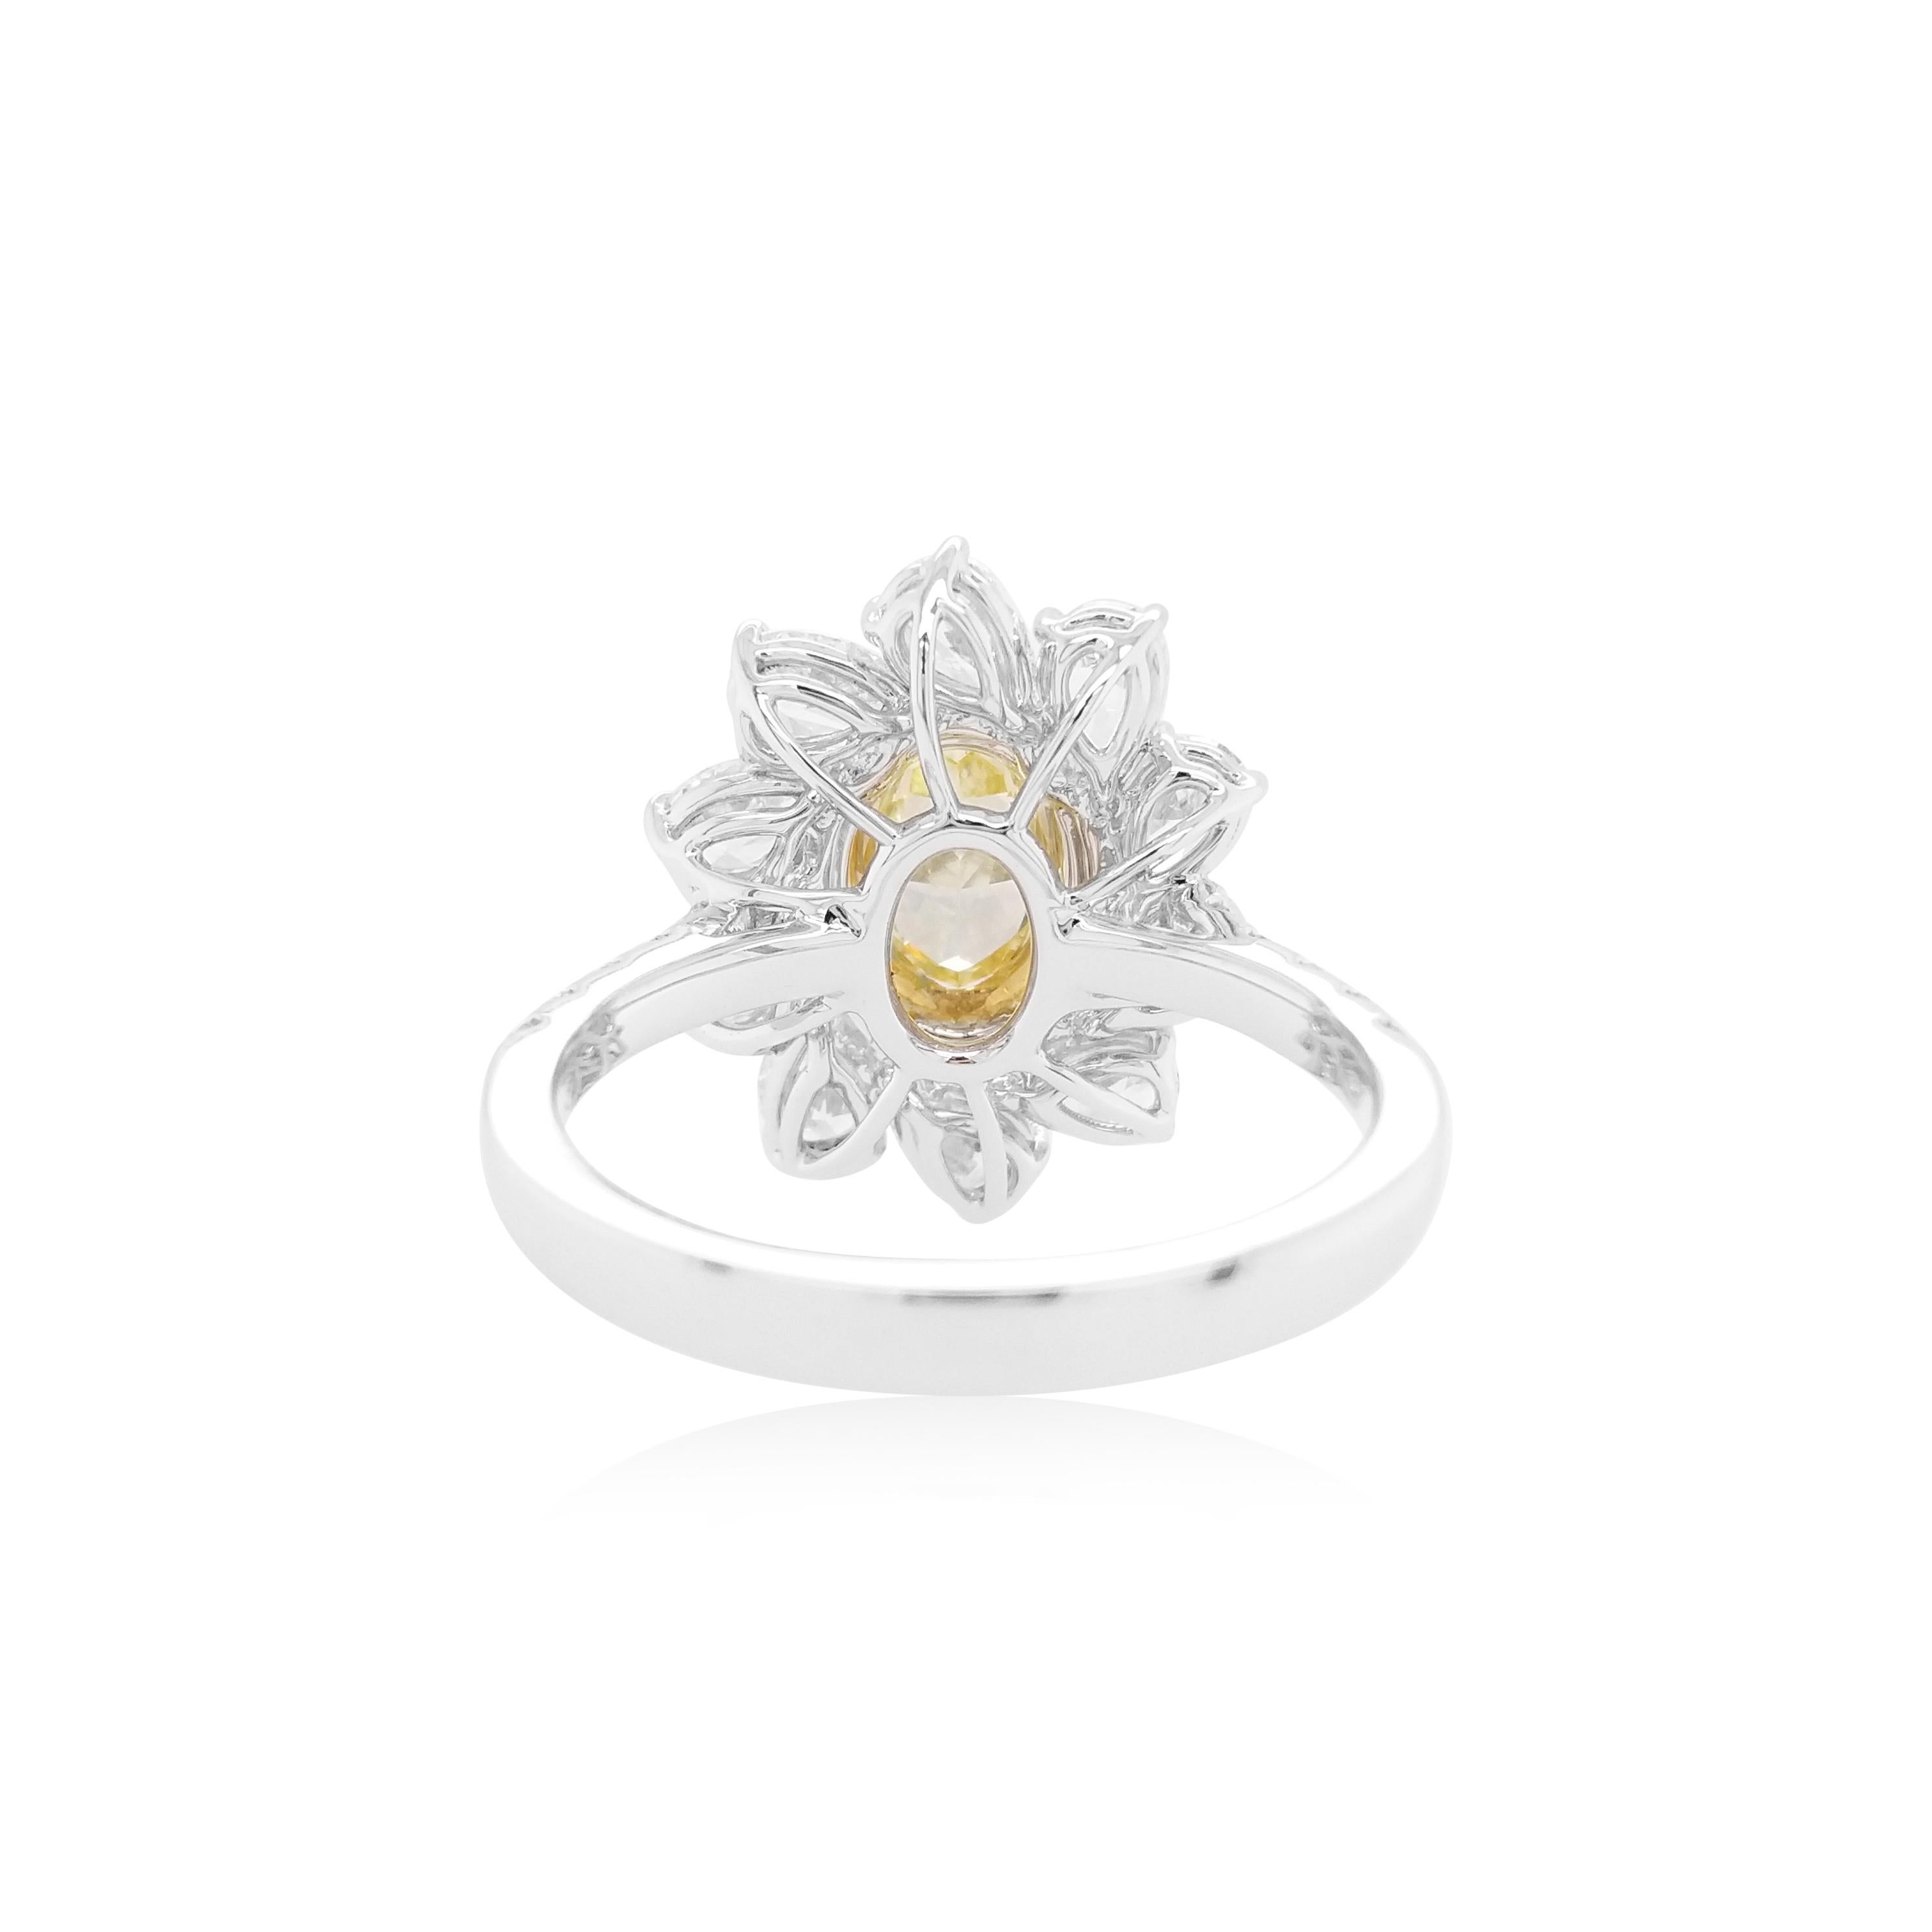 This exclusive Engagement ring features a rare Yellow diamond at the heart of the design, by framing an ornate arrangement of delicate pear-shaped white diamonds set in 18K gold. 

-	Centre Diamond, GIA Certified Oval-shape Yellow Diamond 0.53 carat